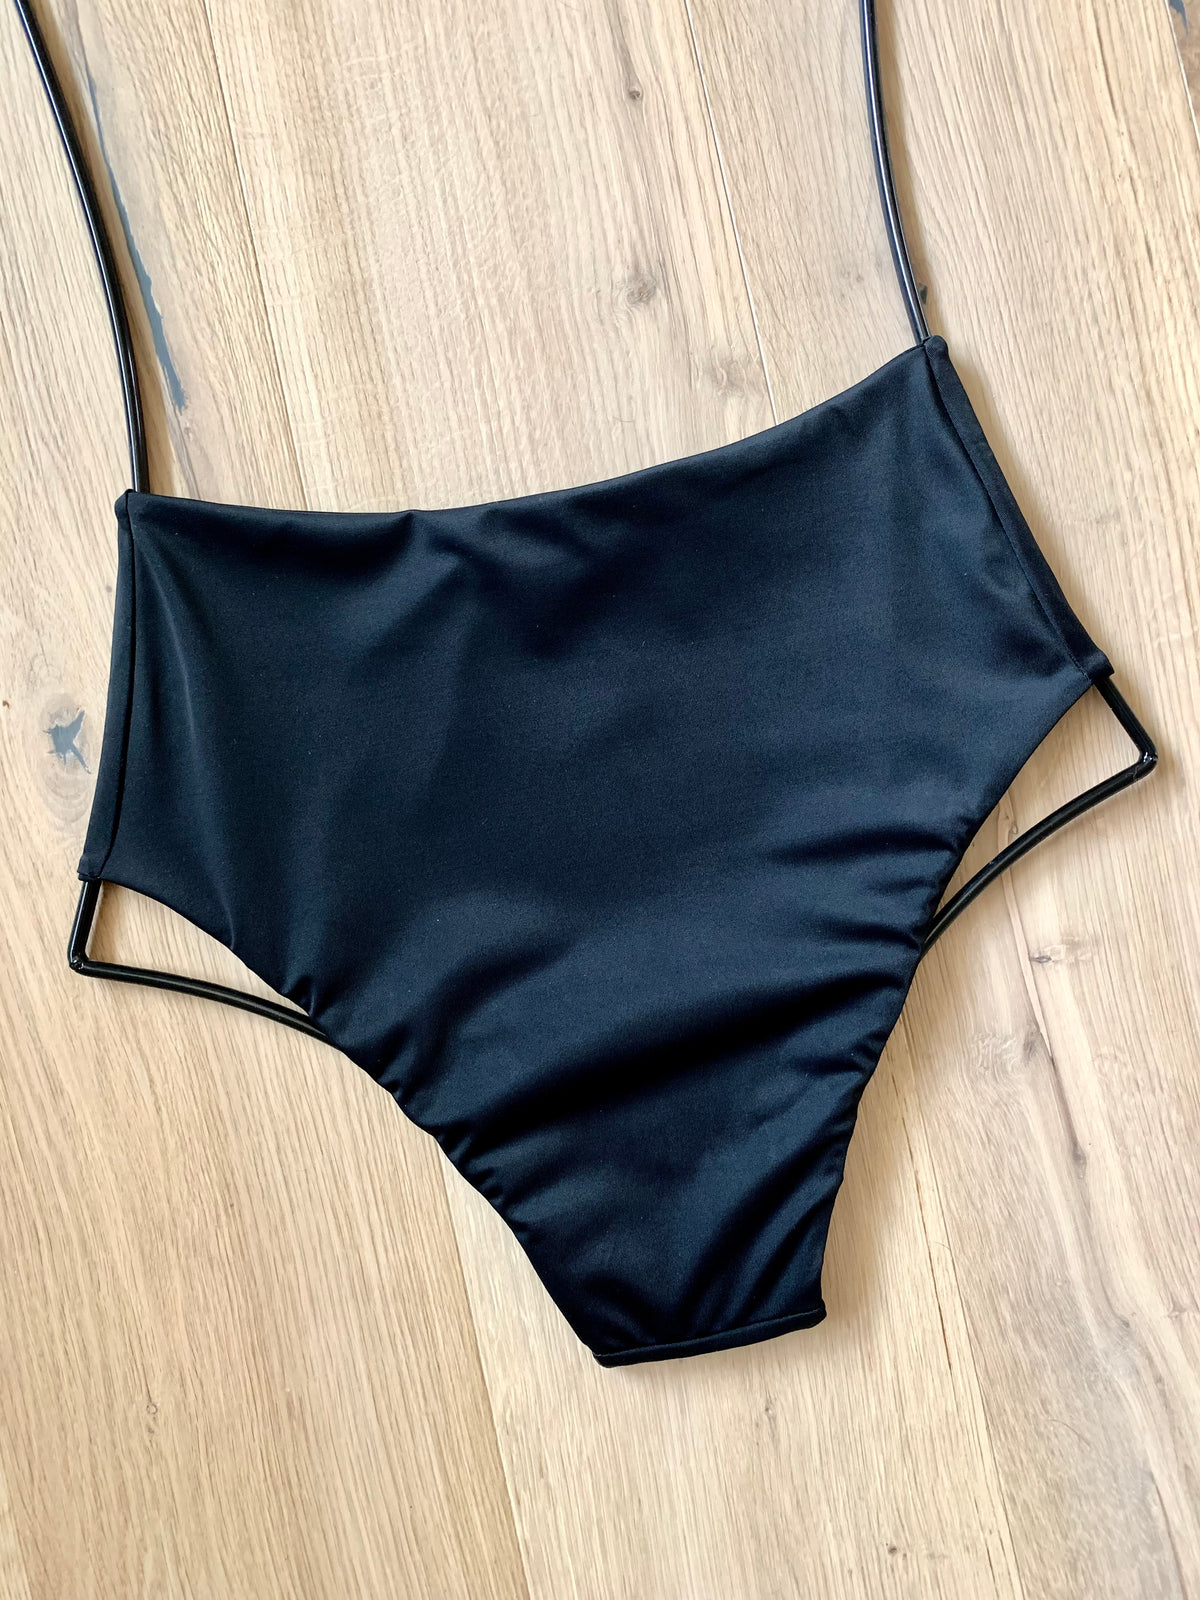 Solid Black Mid-Rise Bottom